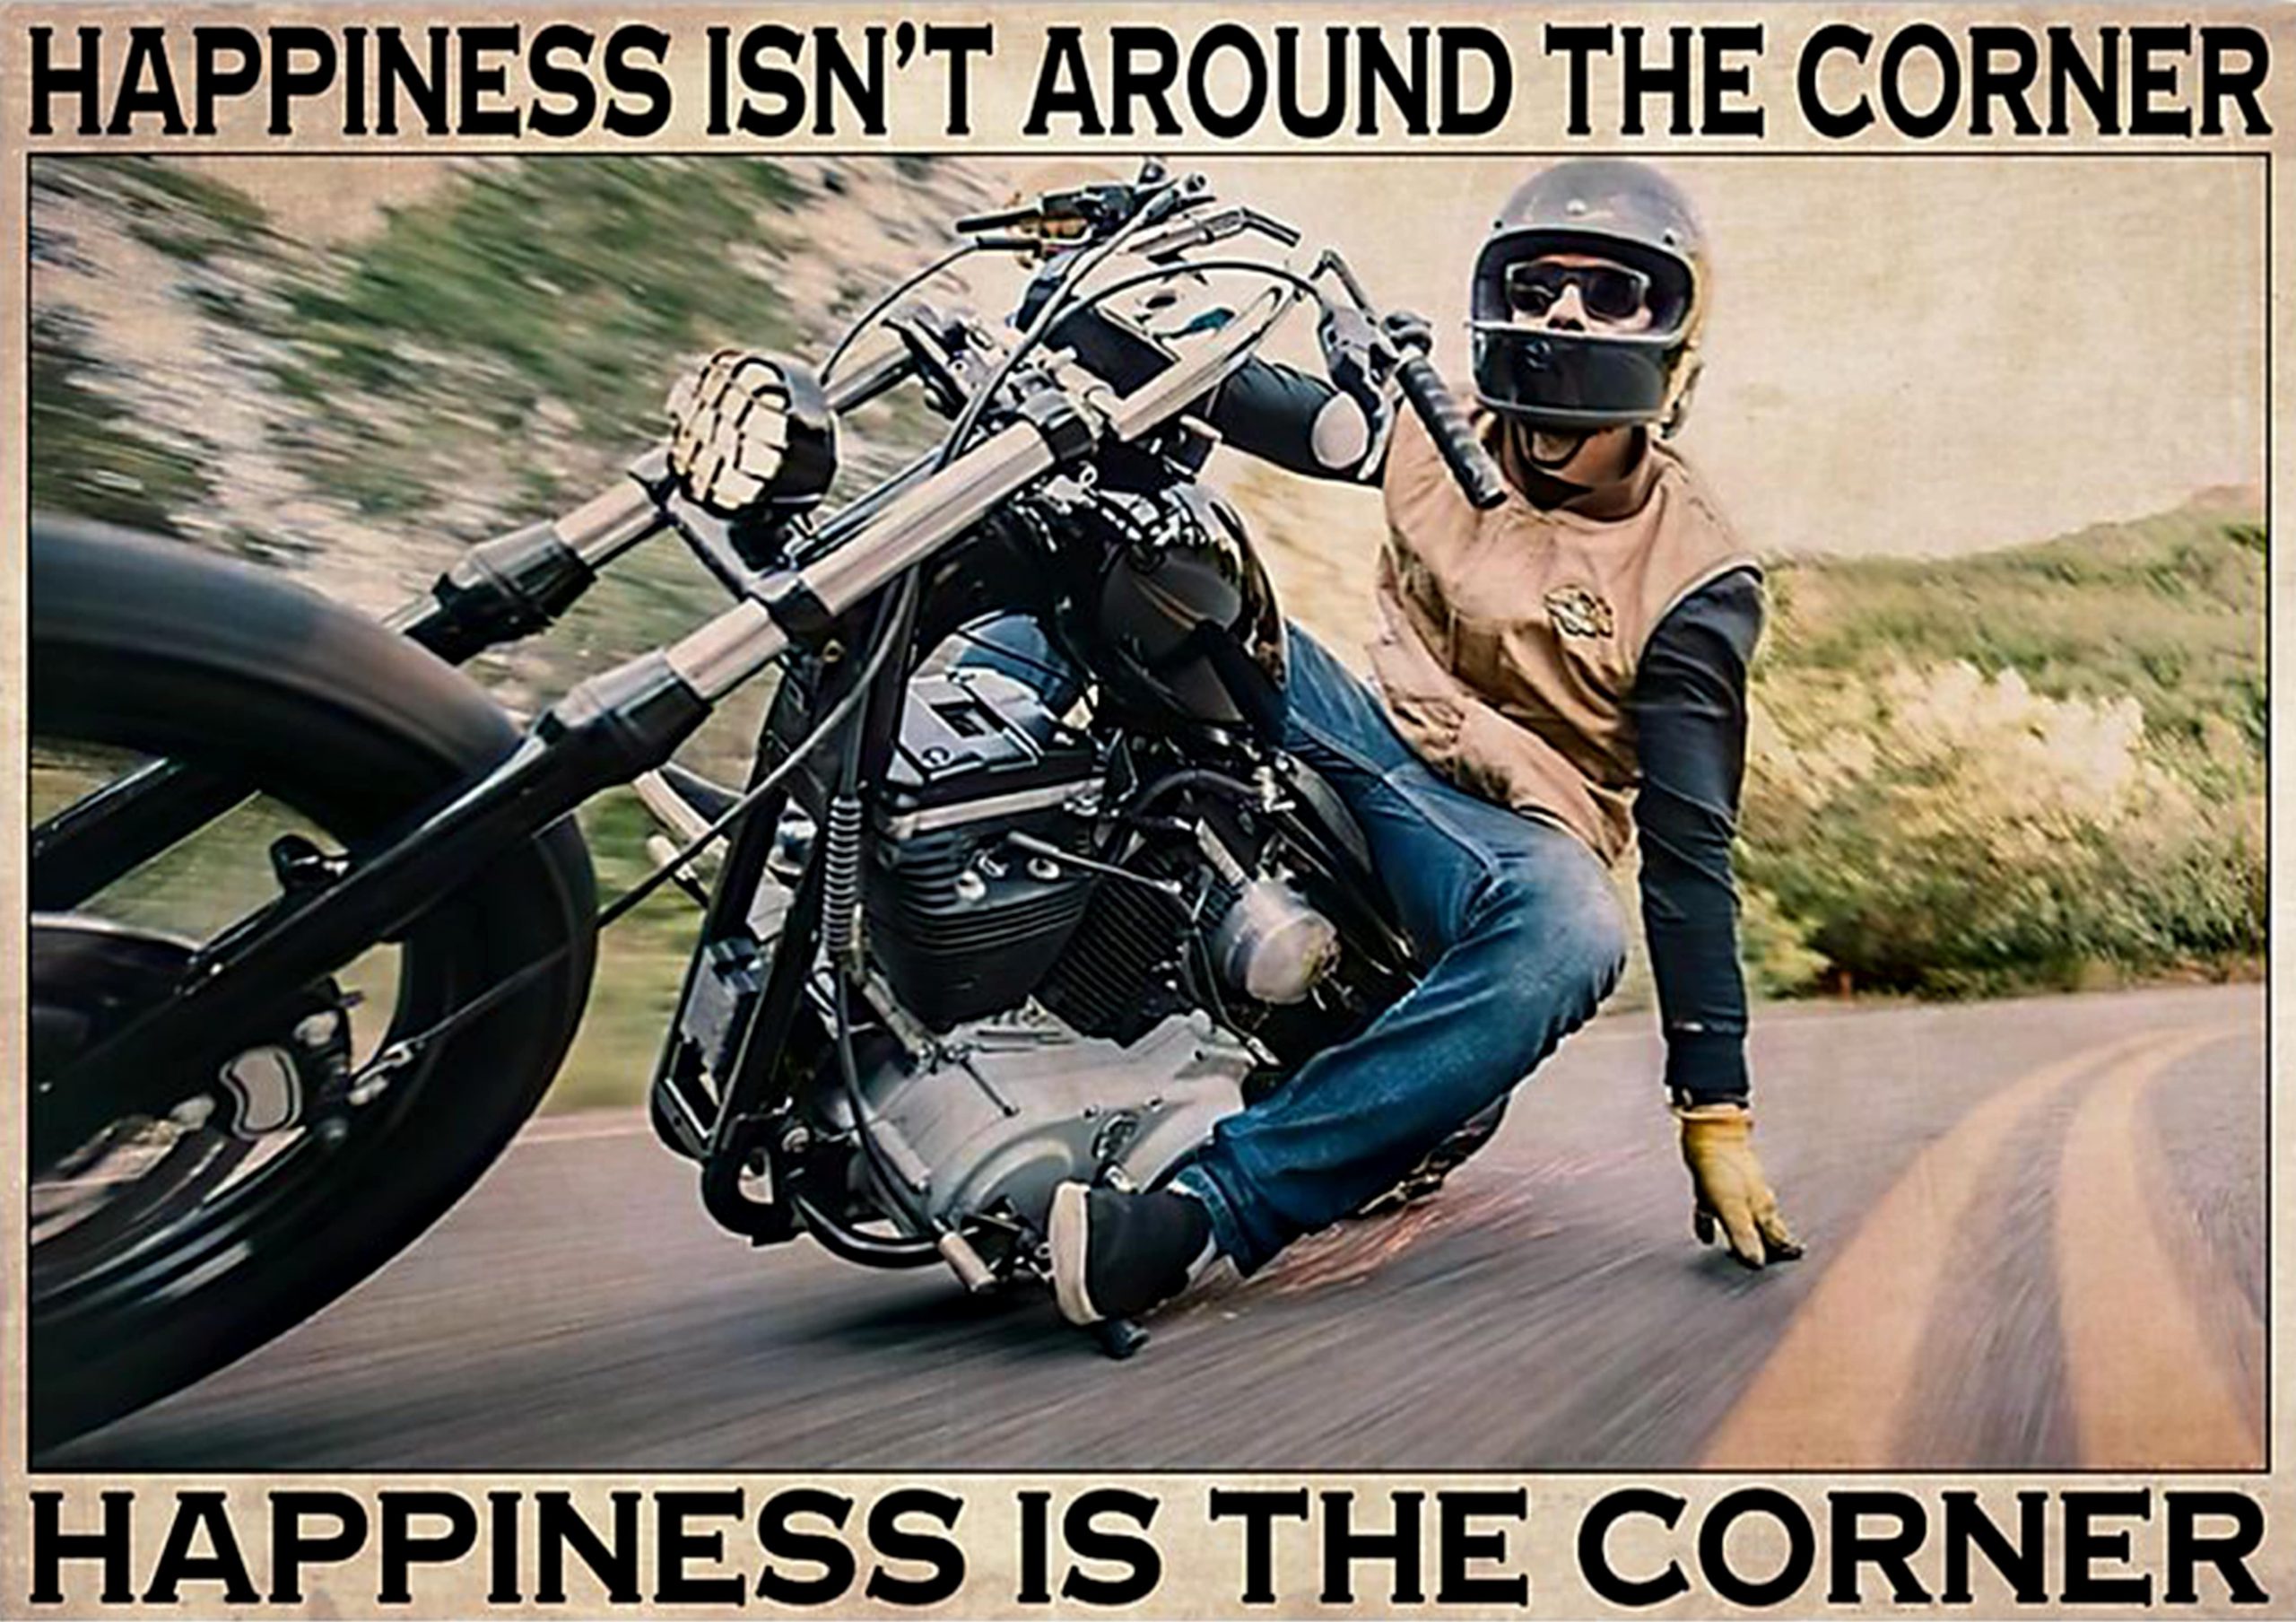 vintage motorcycle happiness isnt around the corner happiness is the corner poster 1 - Copy (2)